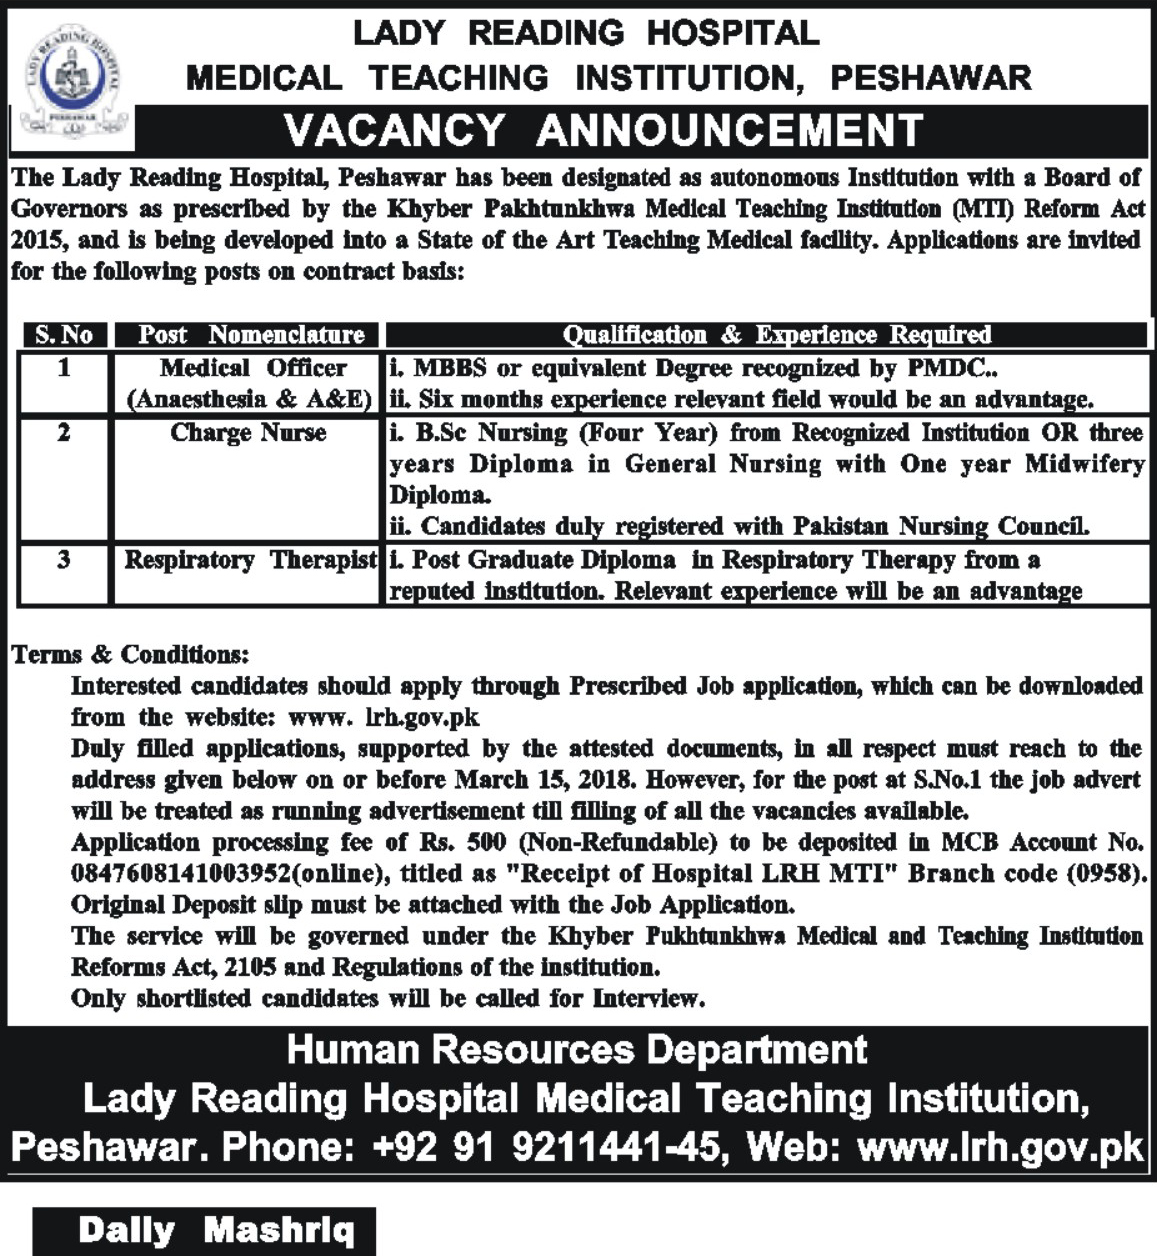 Jobs in Lady Reading Hospital and Institution in Peshawar 27 Feb 2018